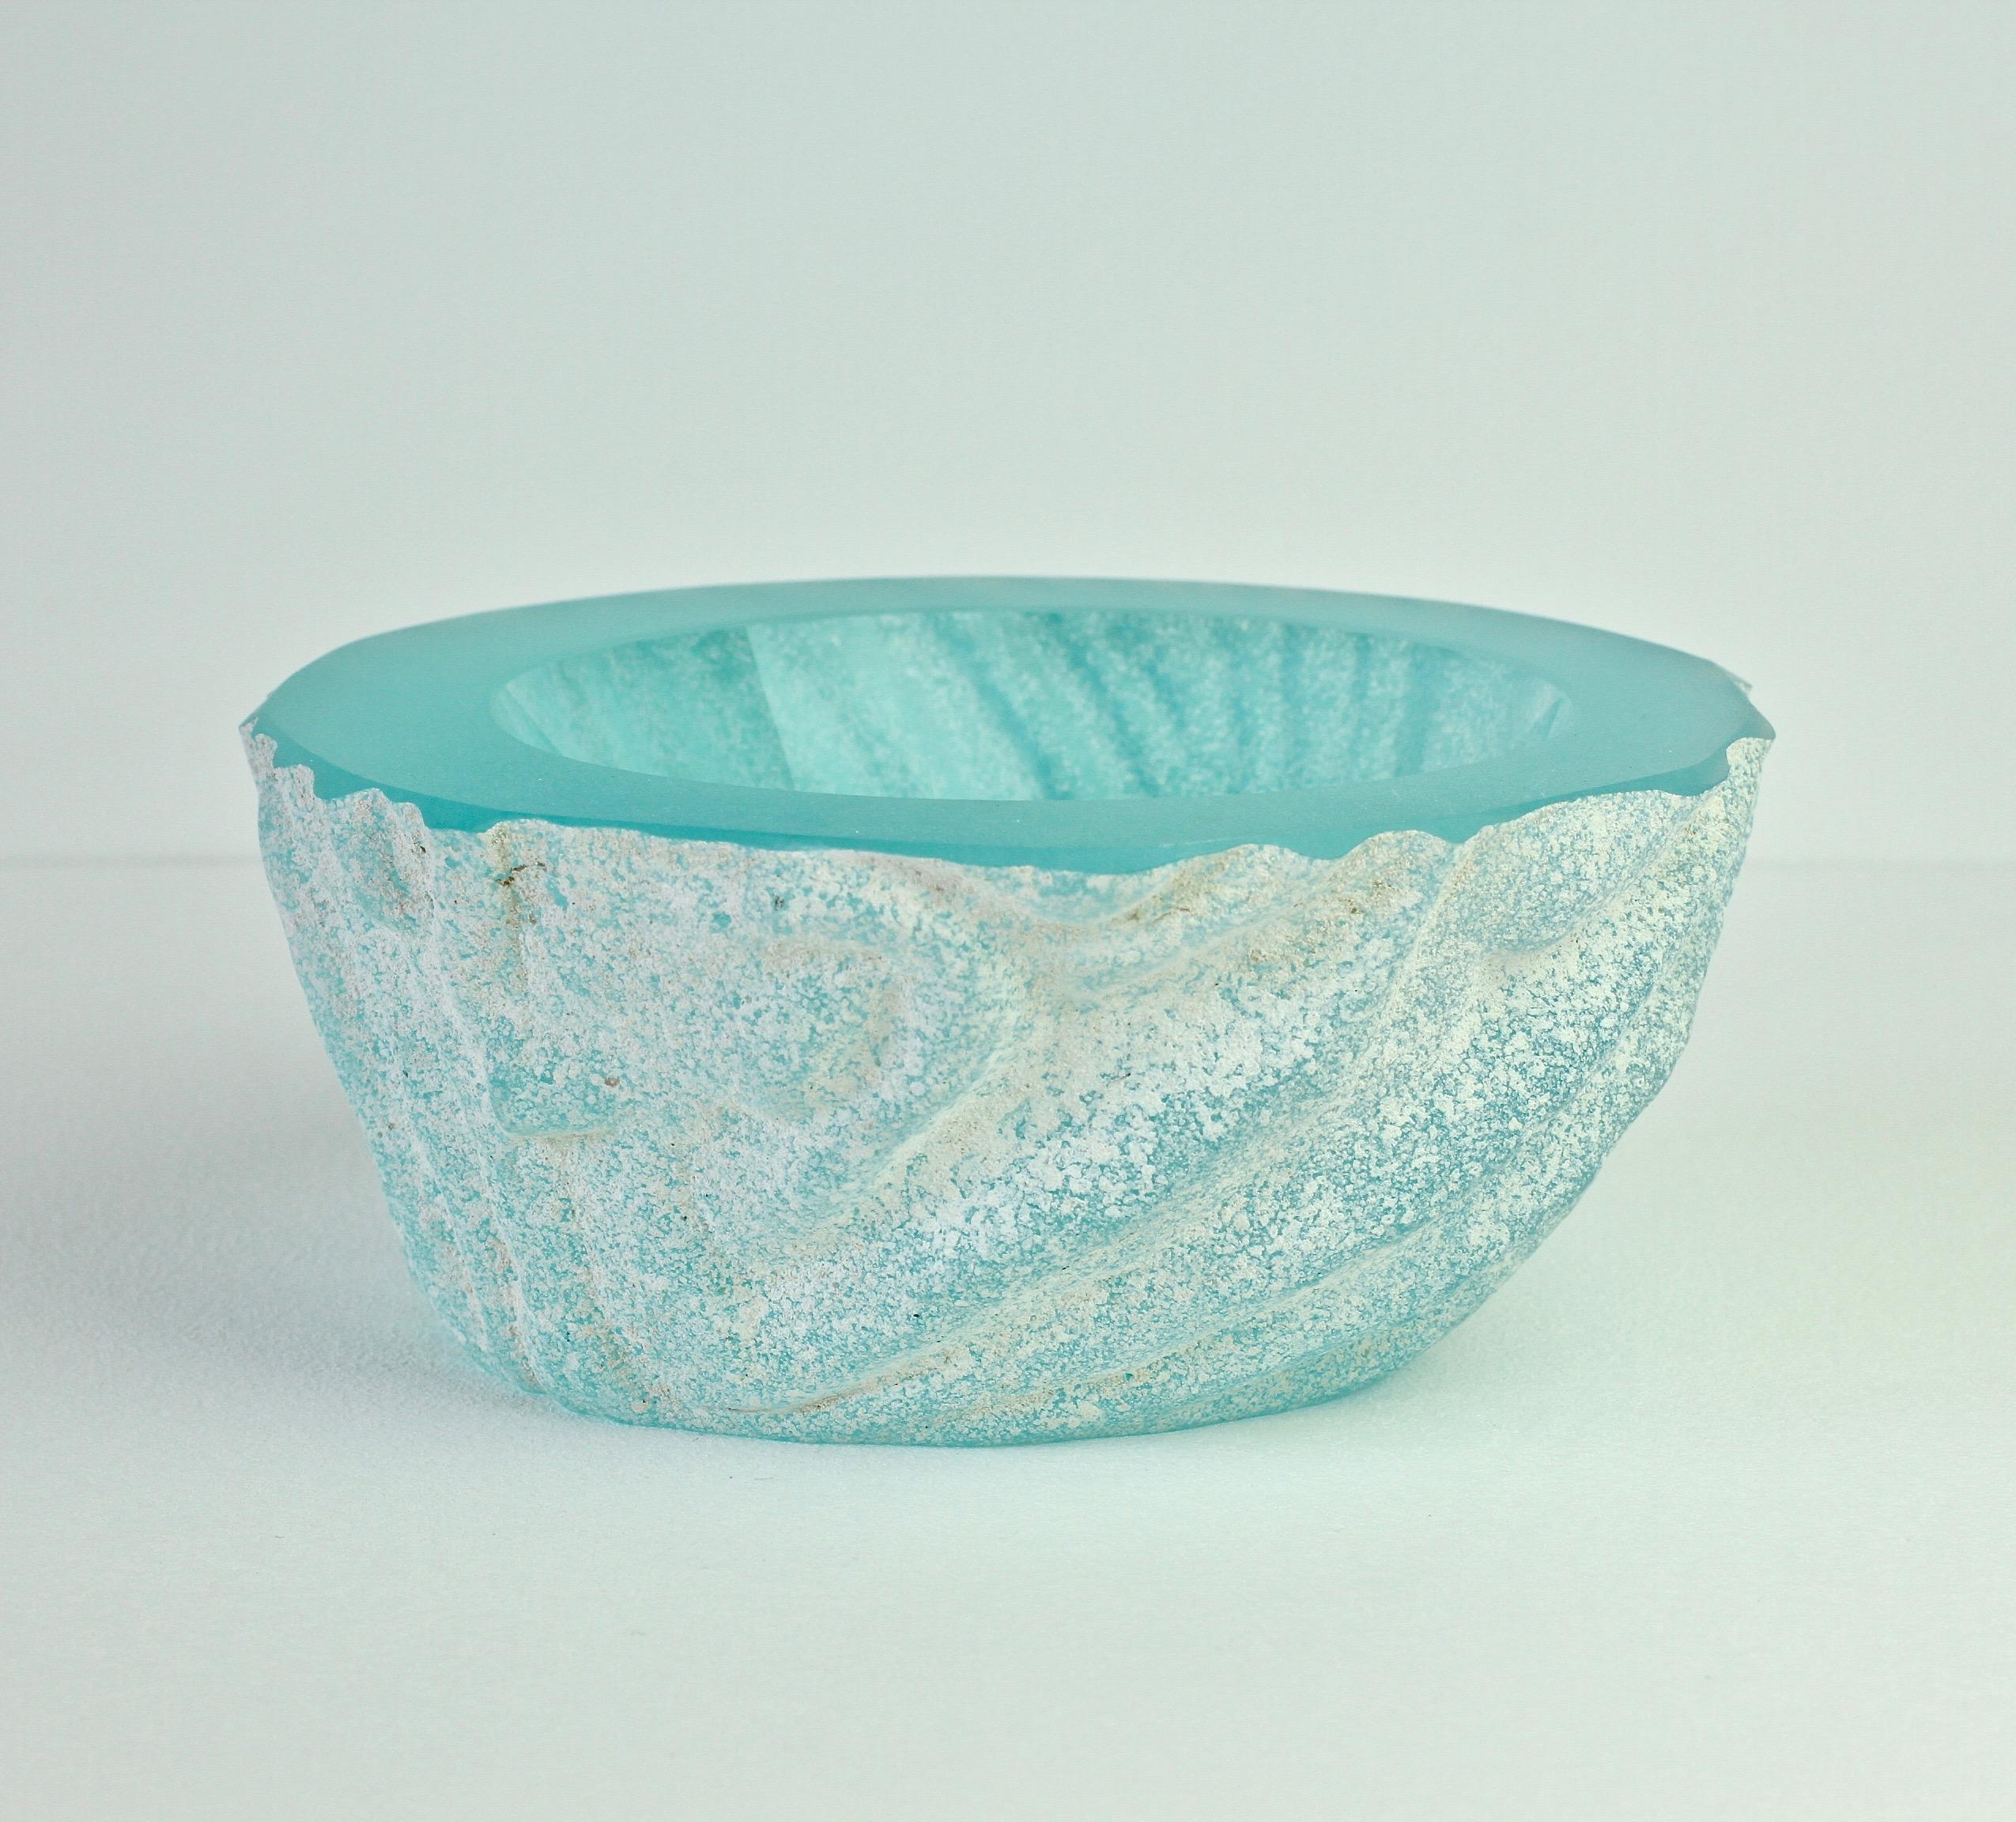 Large, heavy and textured 'a Scavo' blue colored / colored glass bowl or dish attributed to Maurizio Albarelli for Seguso Vetri d'Arte Murano, Italy, circa late 1980s. Elegant in form and showing extraordinary craftmanship with the use of the